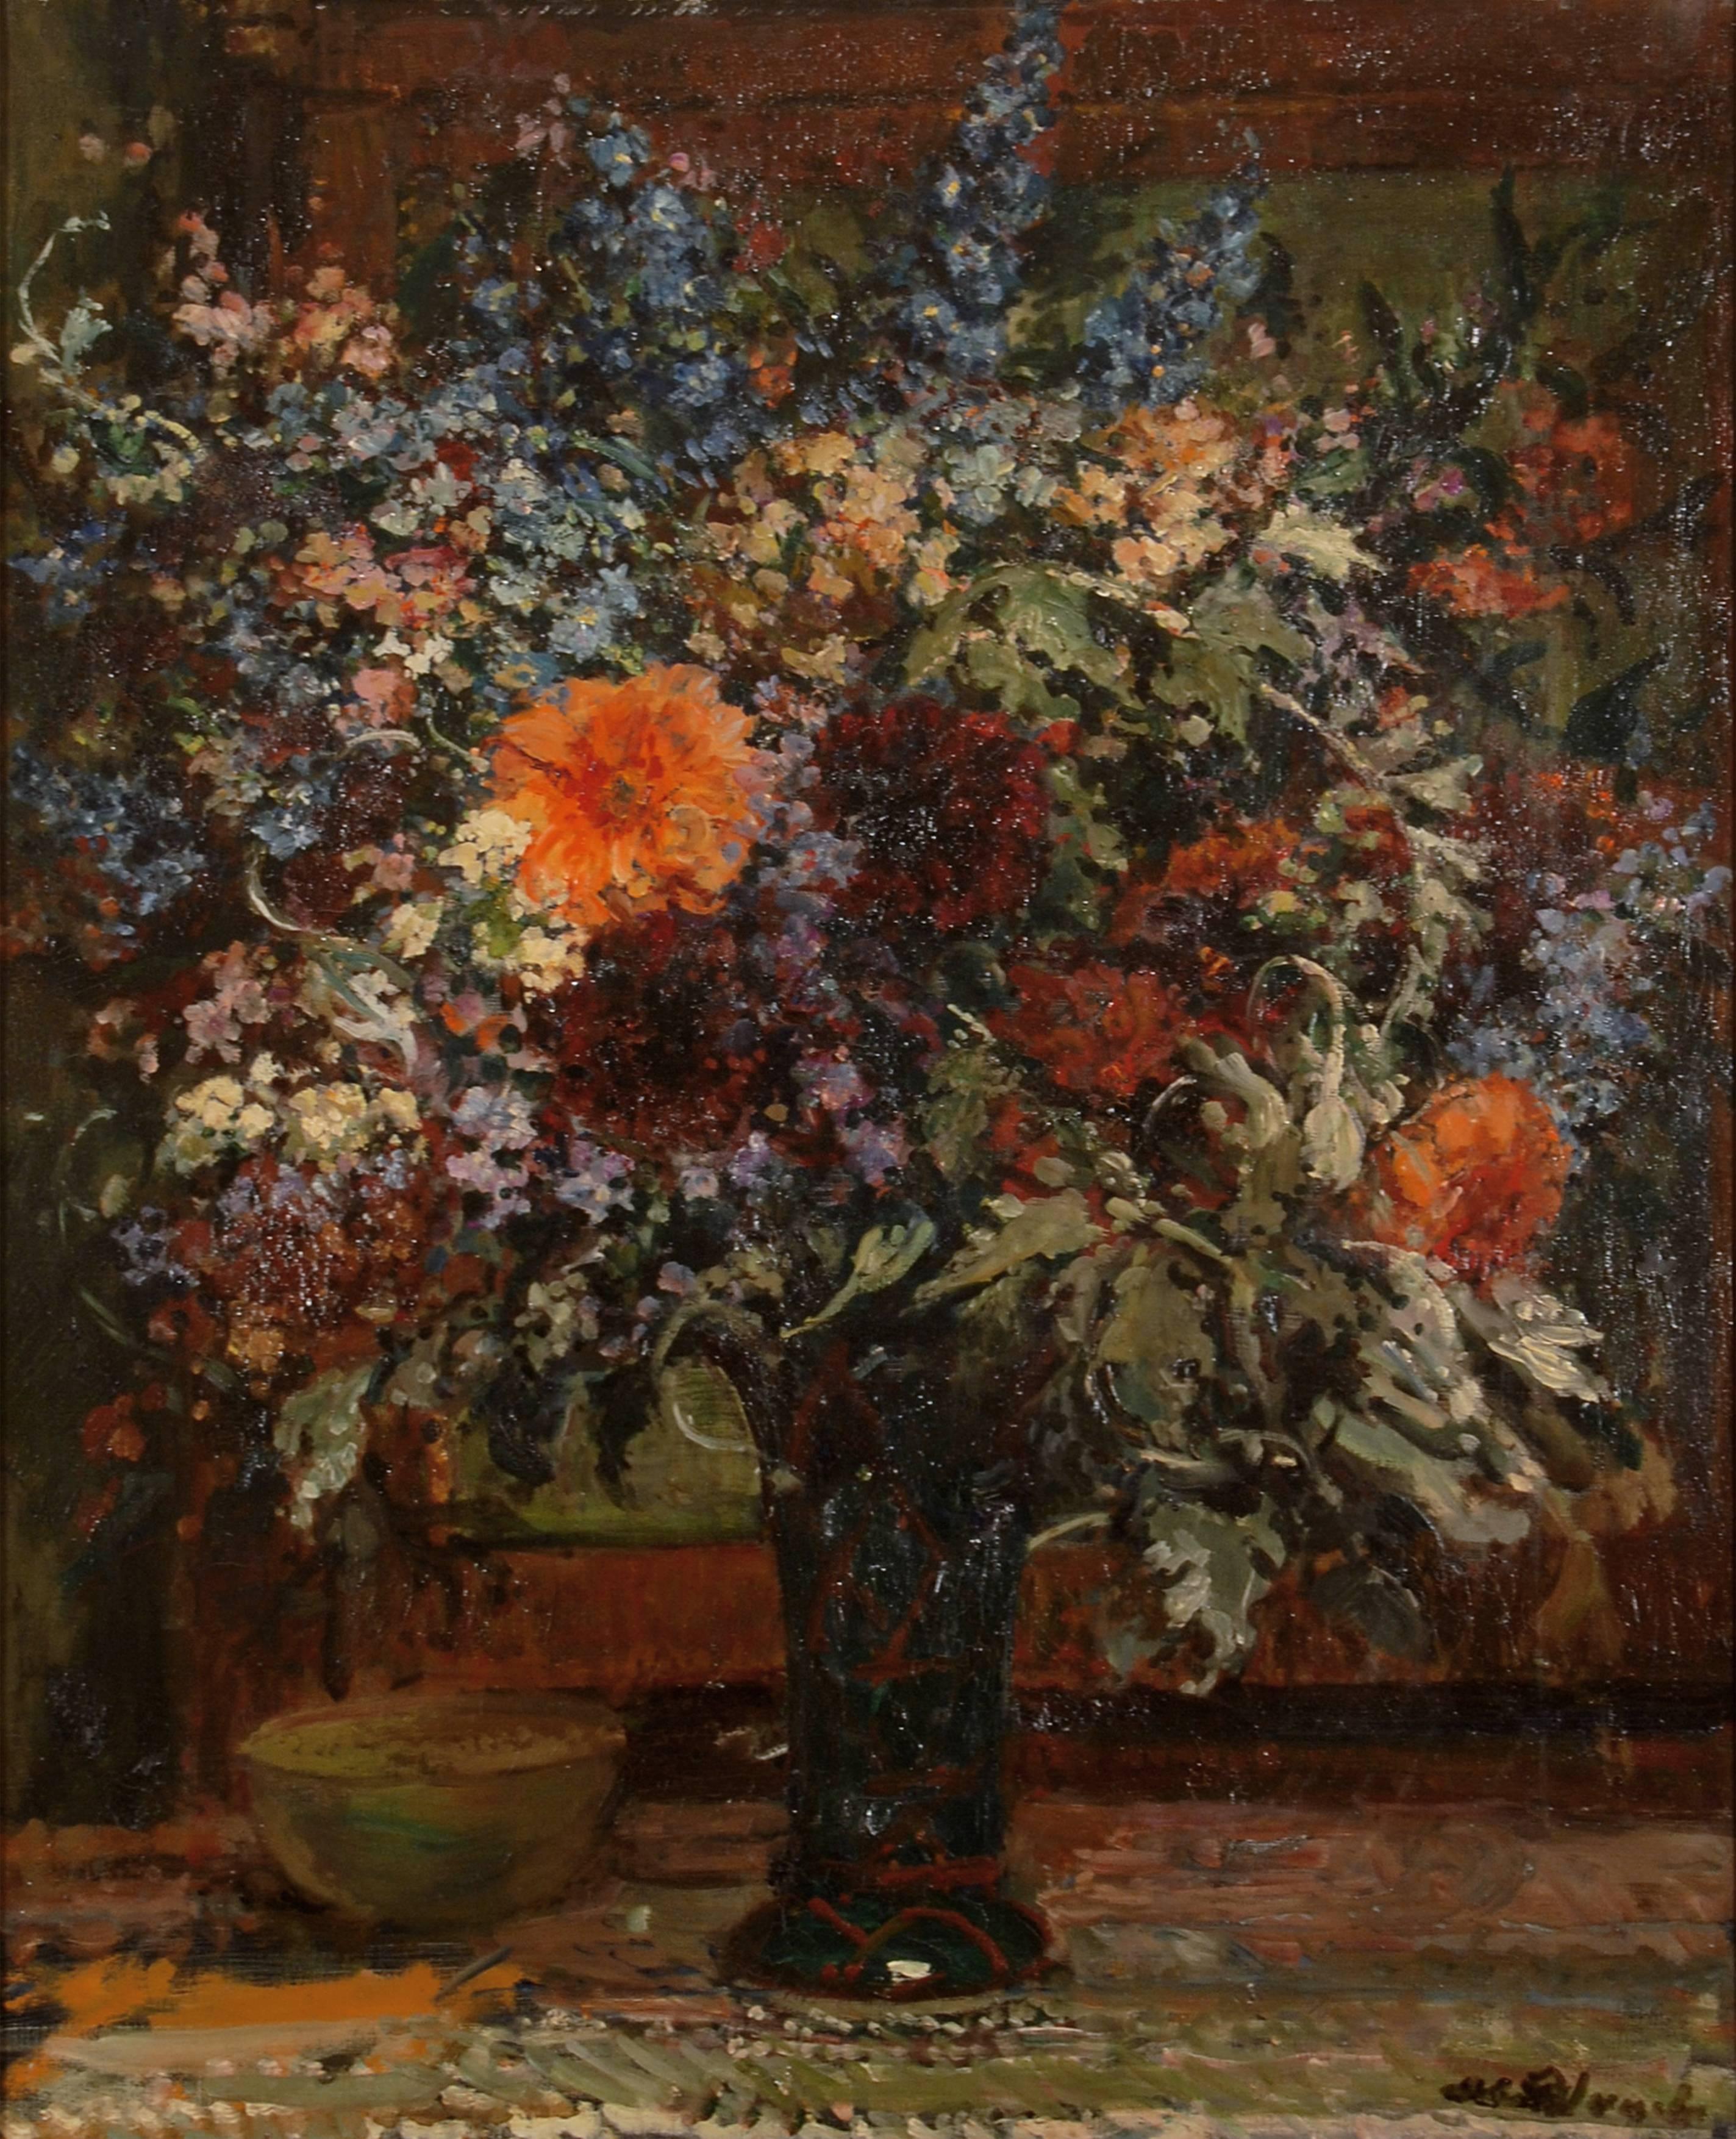 Jacques Emilé Blanche (Paris, 1861 – Offranville, France, 1942)
Bouquet of Flowers, 20th Century, oil on canvas; signed lower right.

SIZE: cm. 81 x 65 x 2
SIZE WITH FRAME: cm. 103 x 88 x 6.5

Certificate of authenticity: 
Sylvie Brame, for the